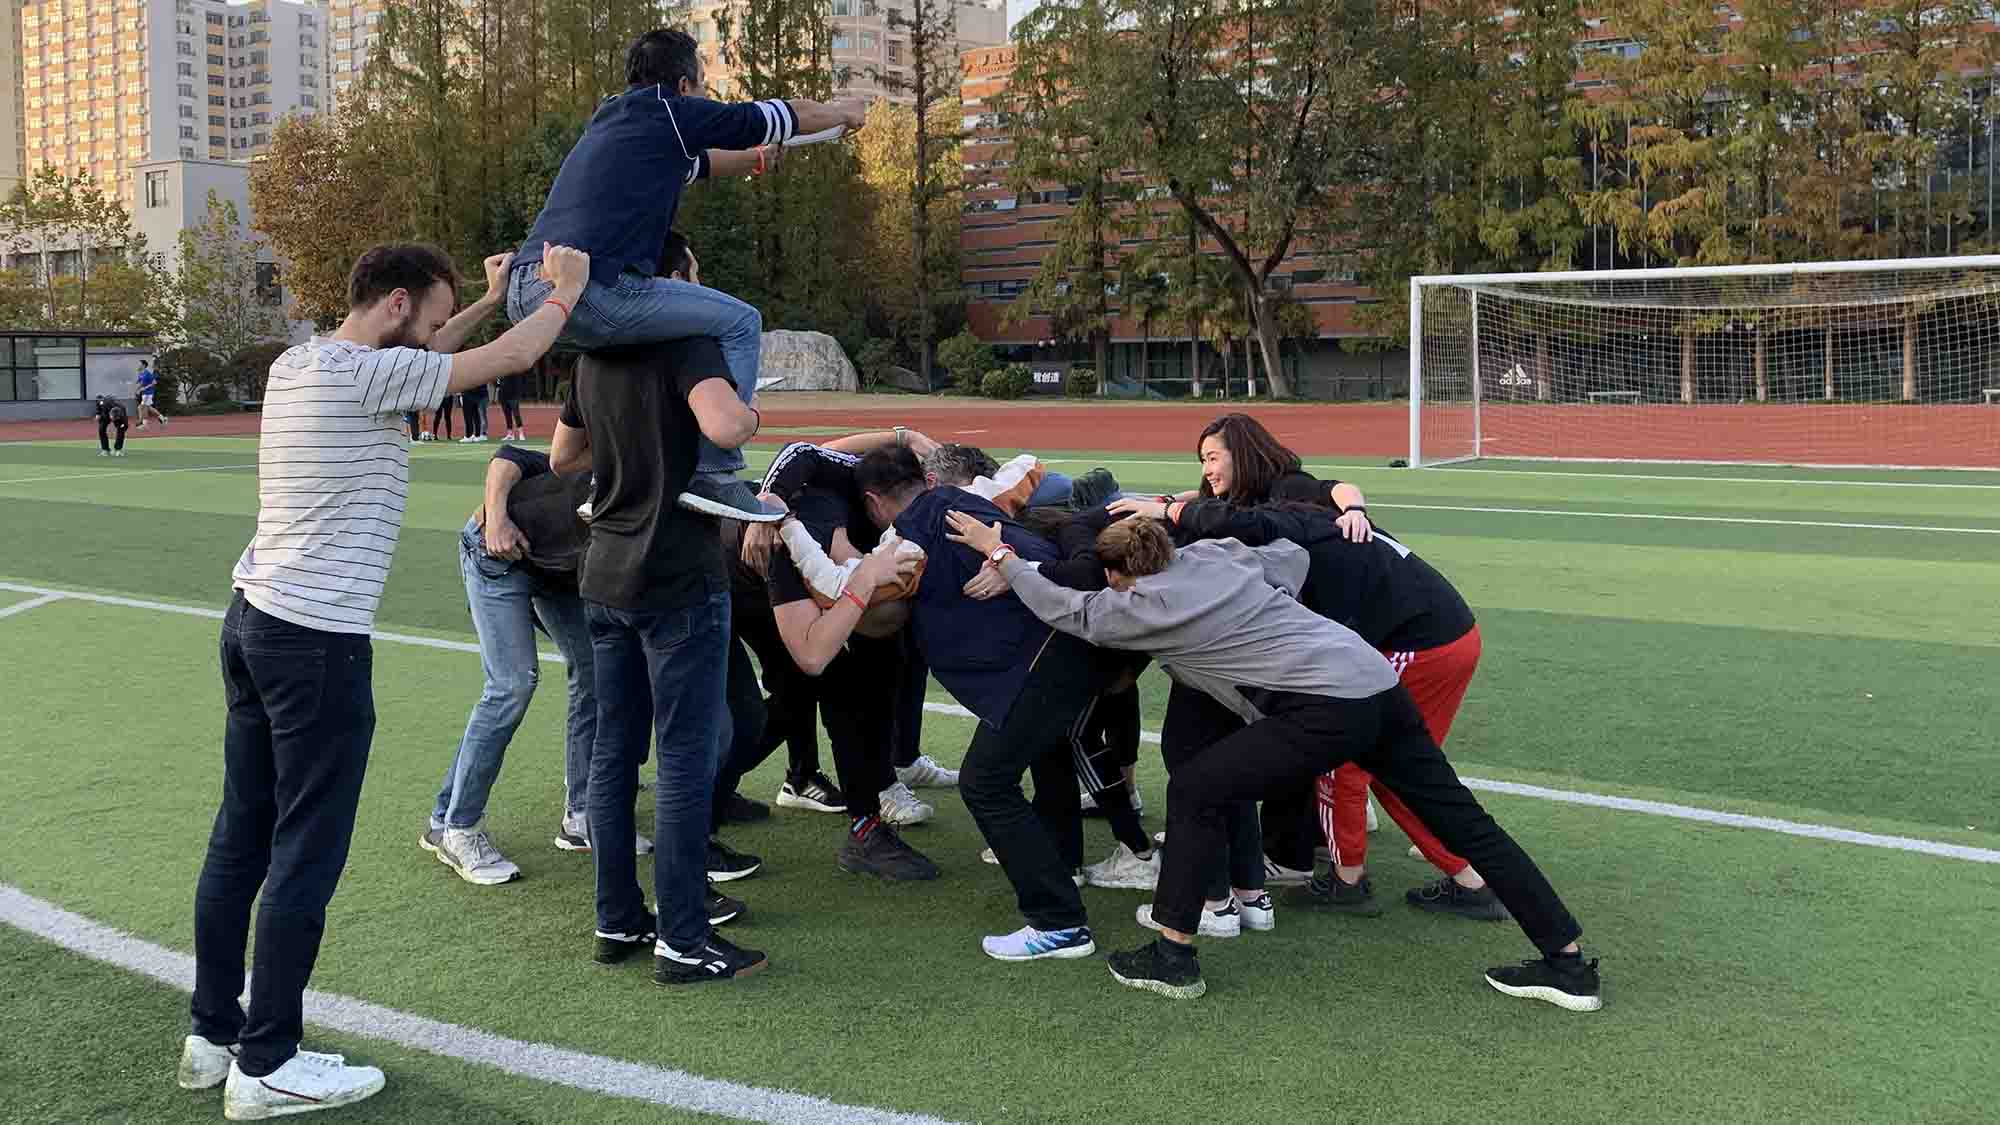 challenging Olympics-themed team building activity